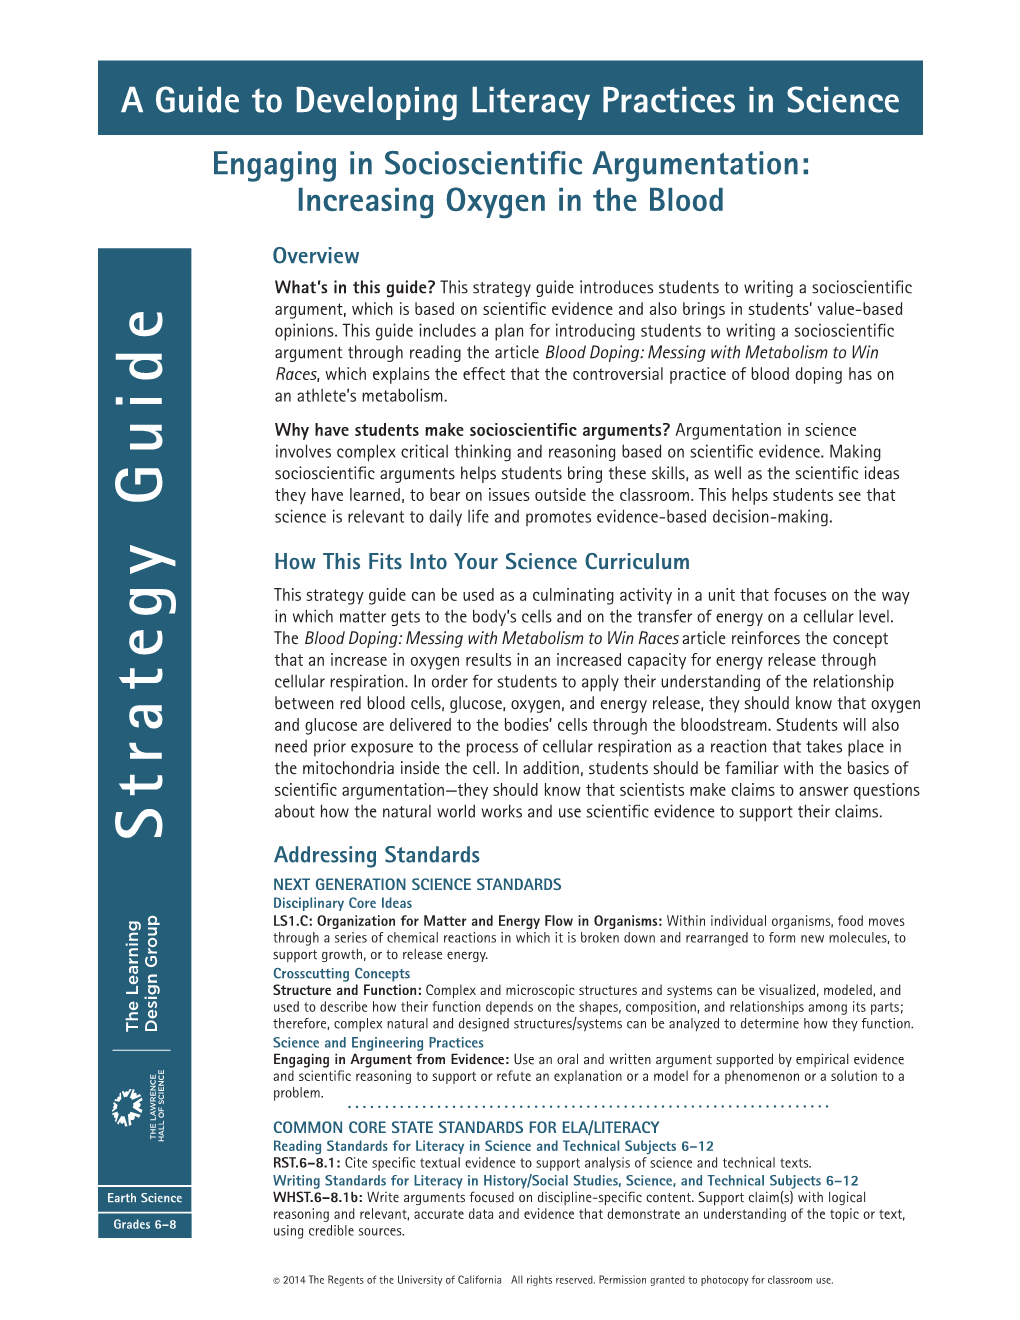 Engaging in Socioscientific Argumentation: Increasing Oxygen in the Blood